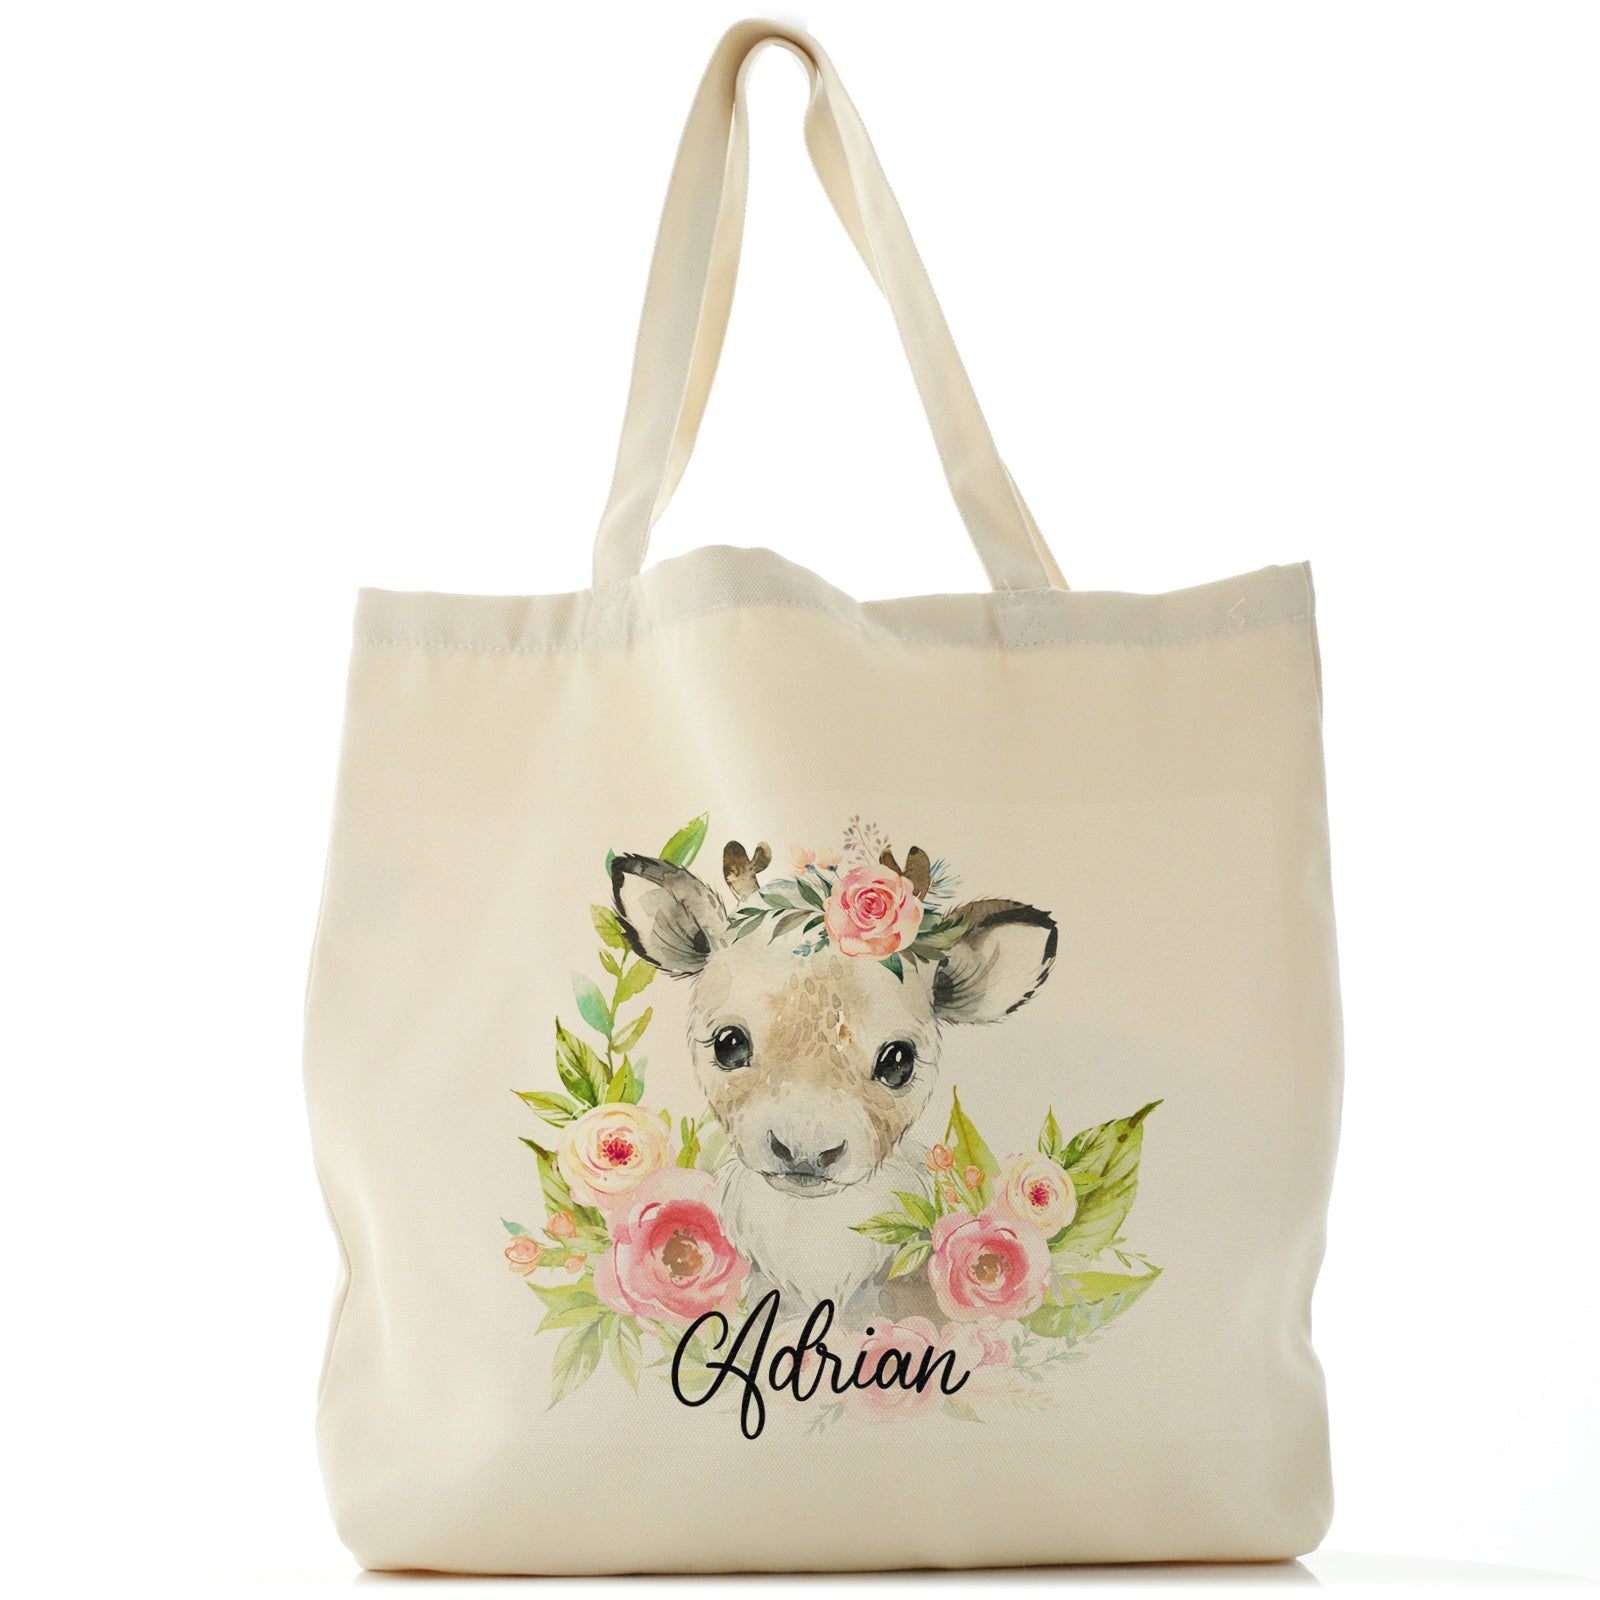 Personalised Canvas Tote Bag with Reindeer Pink Flowers and Cute Text